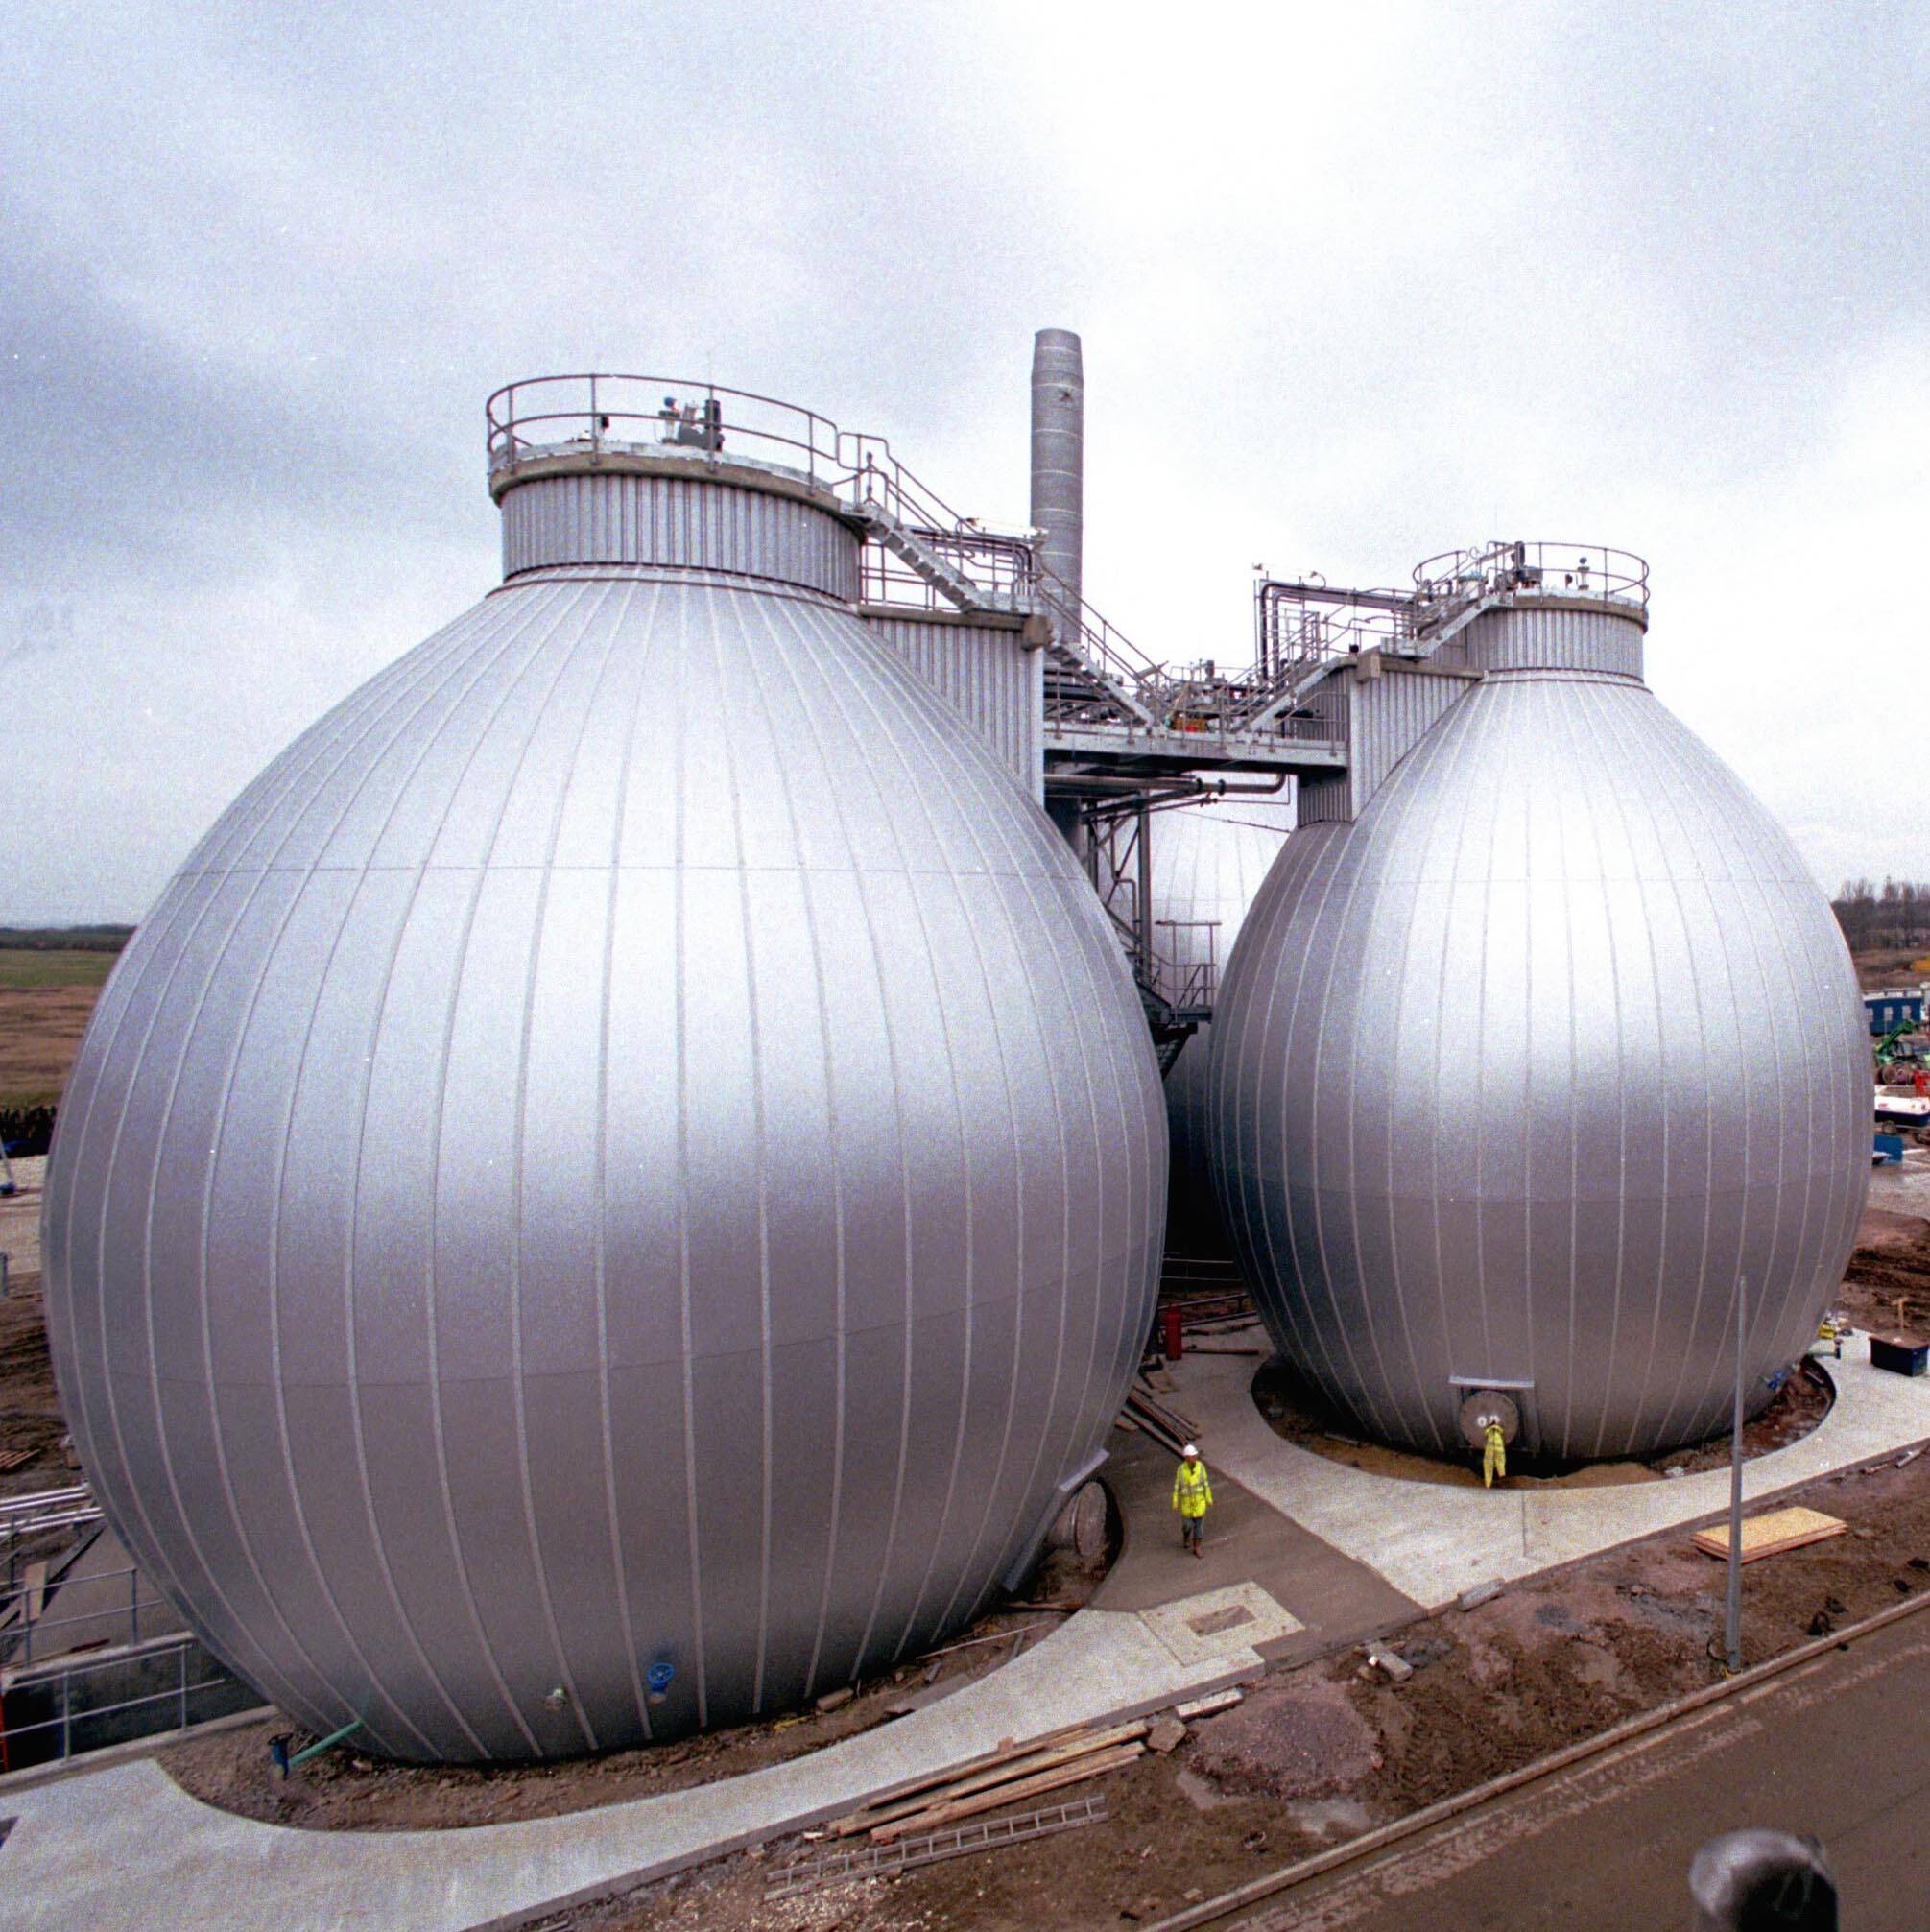 GIB, Foresight give £1.7m in funding to Northern Irish Anaerobic Digestion plant